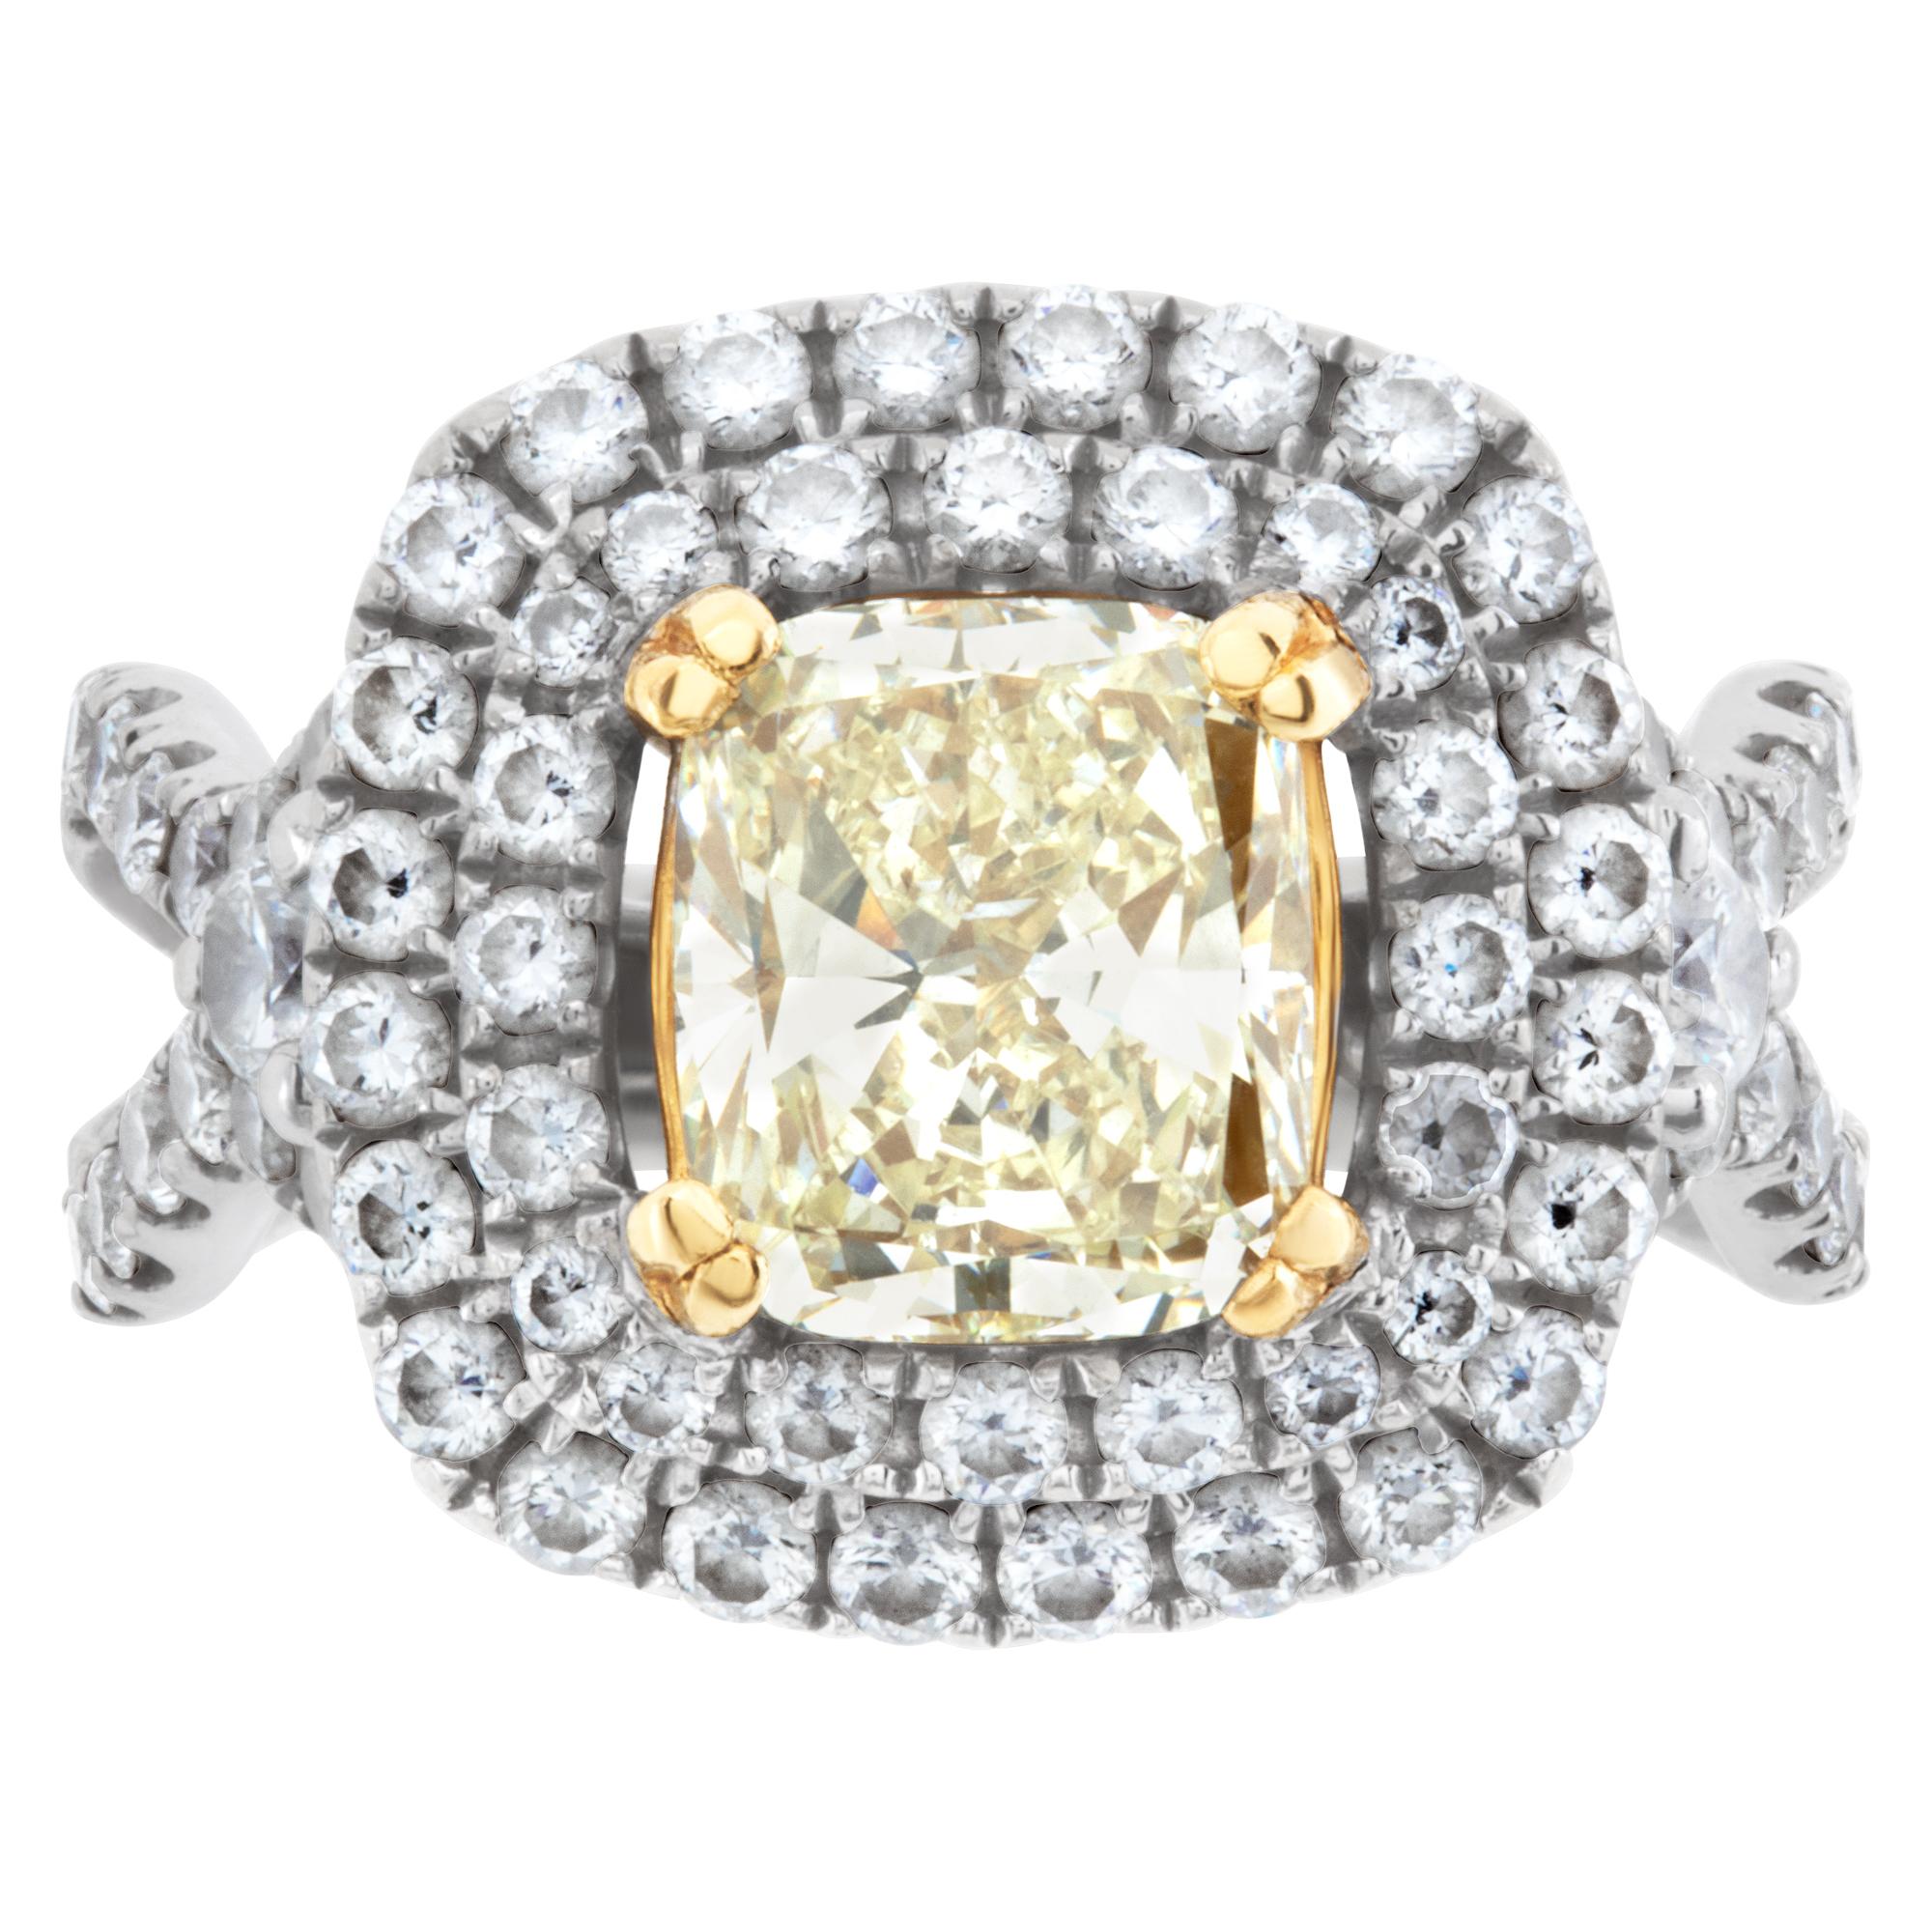 GIA certified cushion modified brilliant cut diamond 2.03 carat (M color, SI1 clarity) ring set in 18k white gold setting with approximately 1.50 carats in G-H color, VS-SI clarity diamond accents and 22k yellow gold basket for a Fancy Yellow look.